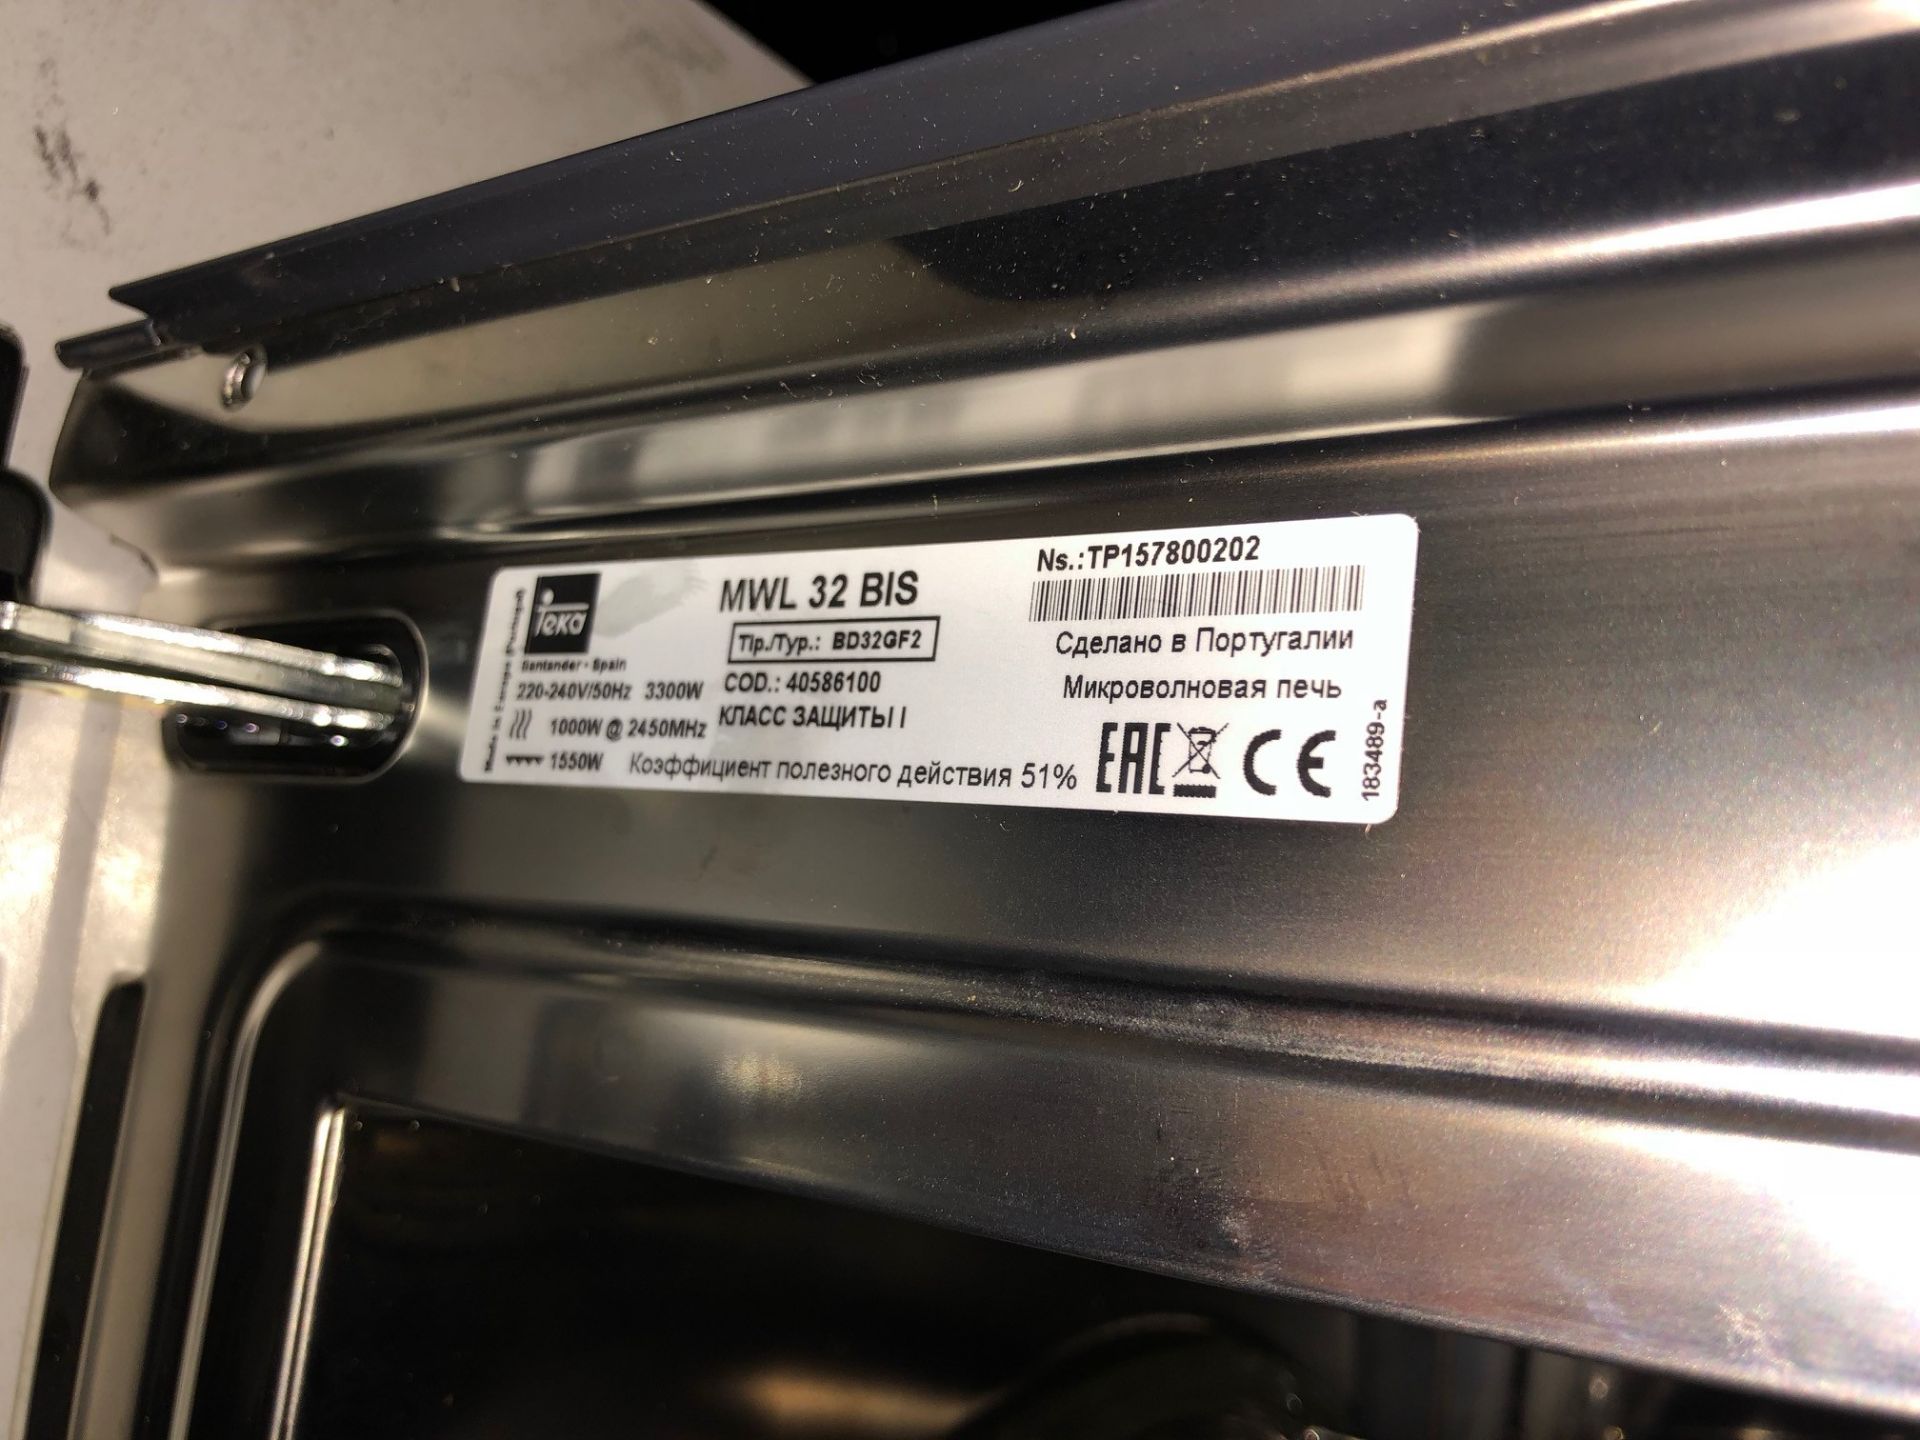 Teka MWL 32 BIS Combi Microwave with Grill (Brand New) - Image 3 of 3